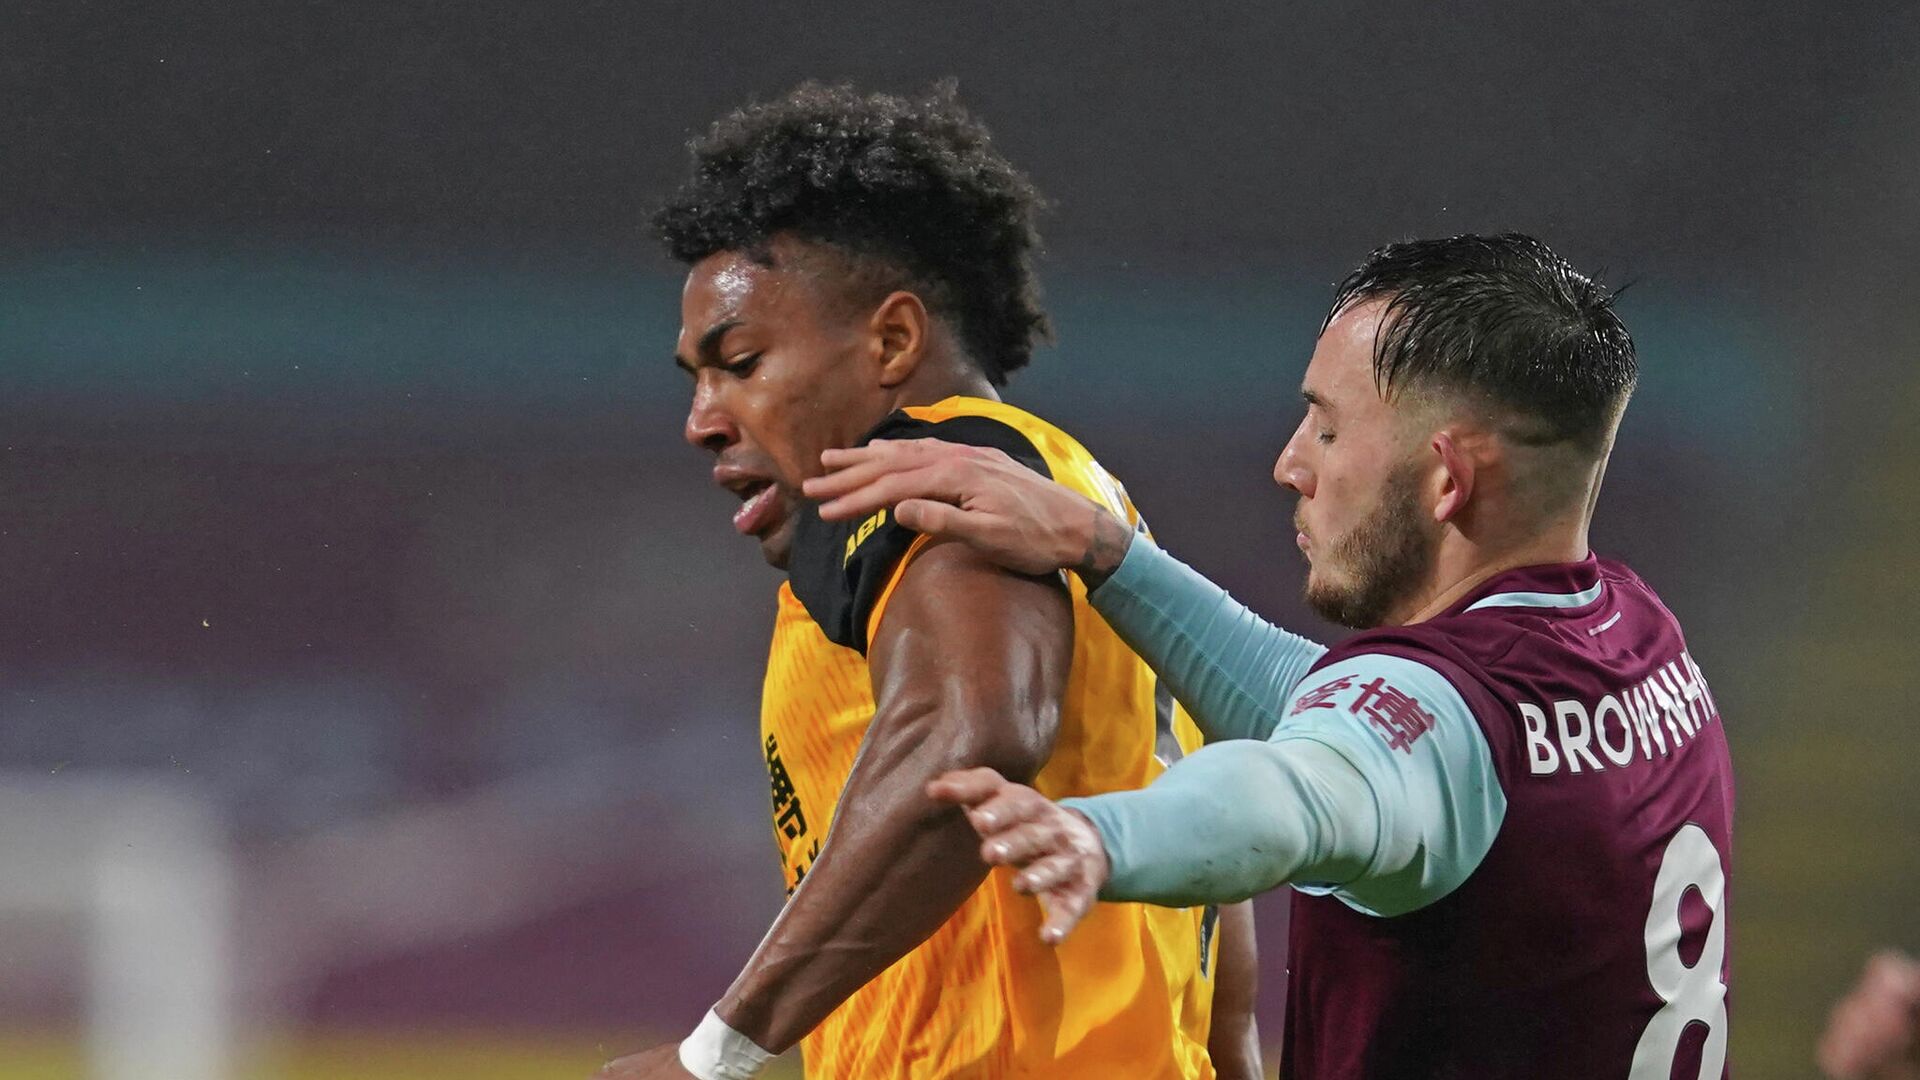 Wolverhampton Wanderers' Spanish midfielder Adama Traore (L) vies with Burnley's English midfielder Josh Brownhill (R) during the English Premier League football match between Burnley and Wolverhampton Wanderers at Turf Moor in Burnley, north west England on December 21, 2020. (Photo by Jon Super / POOL / AFP) / RESTRICTED TO EDITORIAL USE. No use with unauthorized audio, video, data, fixture lists, club/league logos or 'live' services. Online in-match use limited to 120 images. An additional 40 images may be used in extra time. No video emulation. Social media in-match use limited to 120 images. An additional 40 images may be used in extra time. No use in betting publications, games or single club/league/player publications. /  - РИА Новости, 1920, 21.12.2020